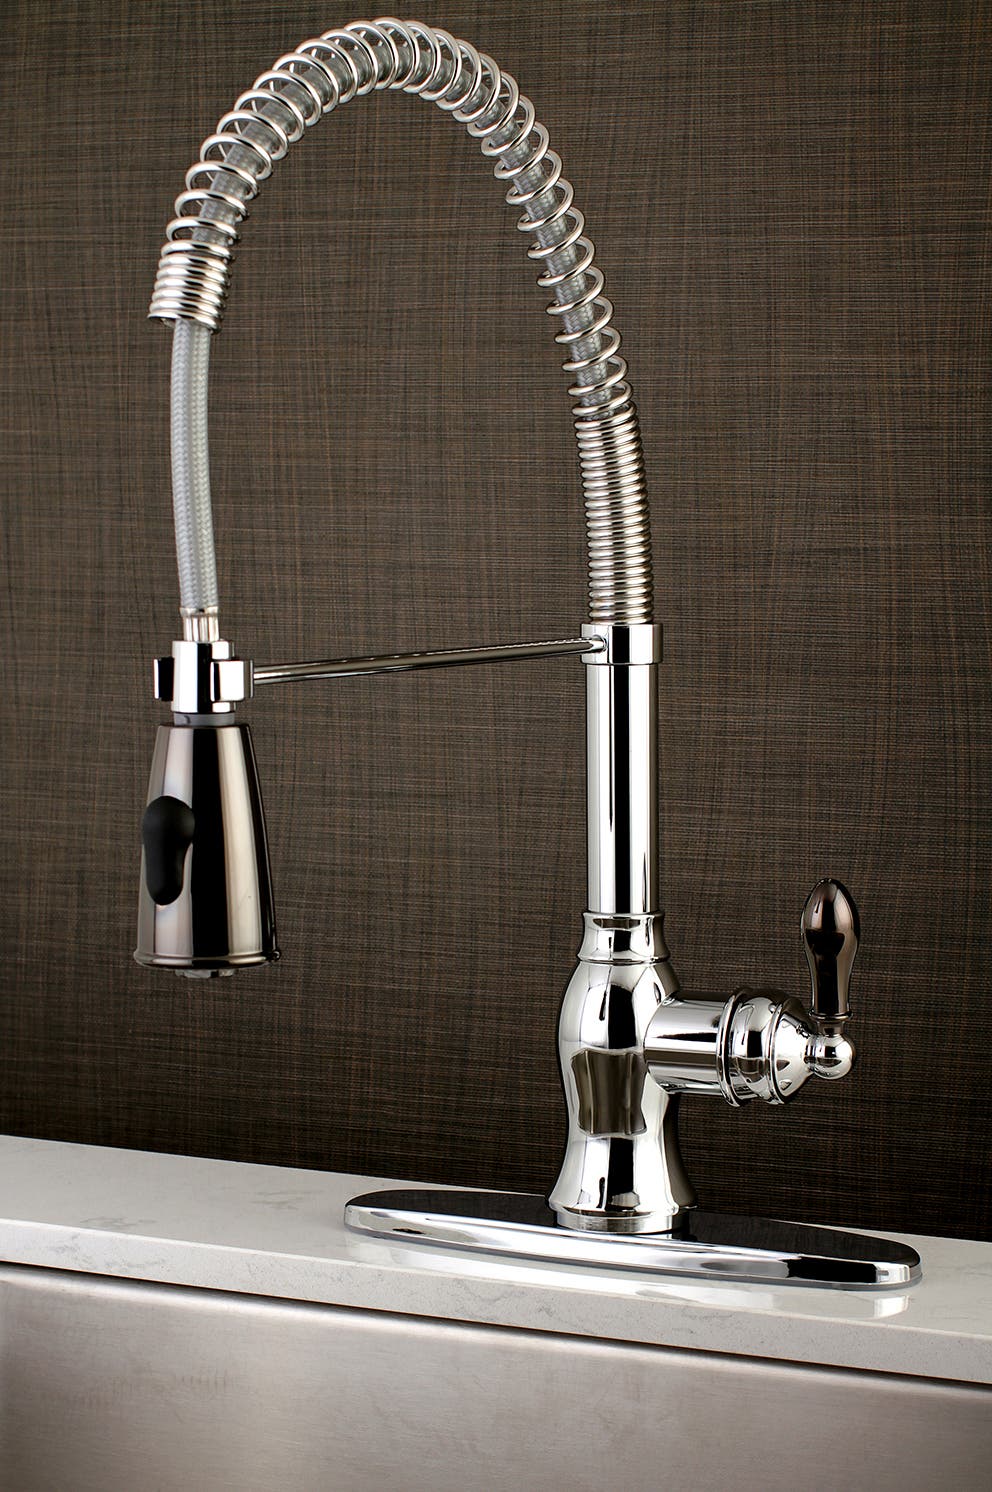 Choosing a faucet for your home bar